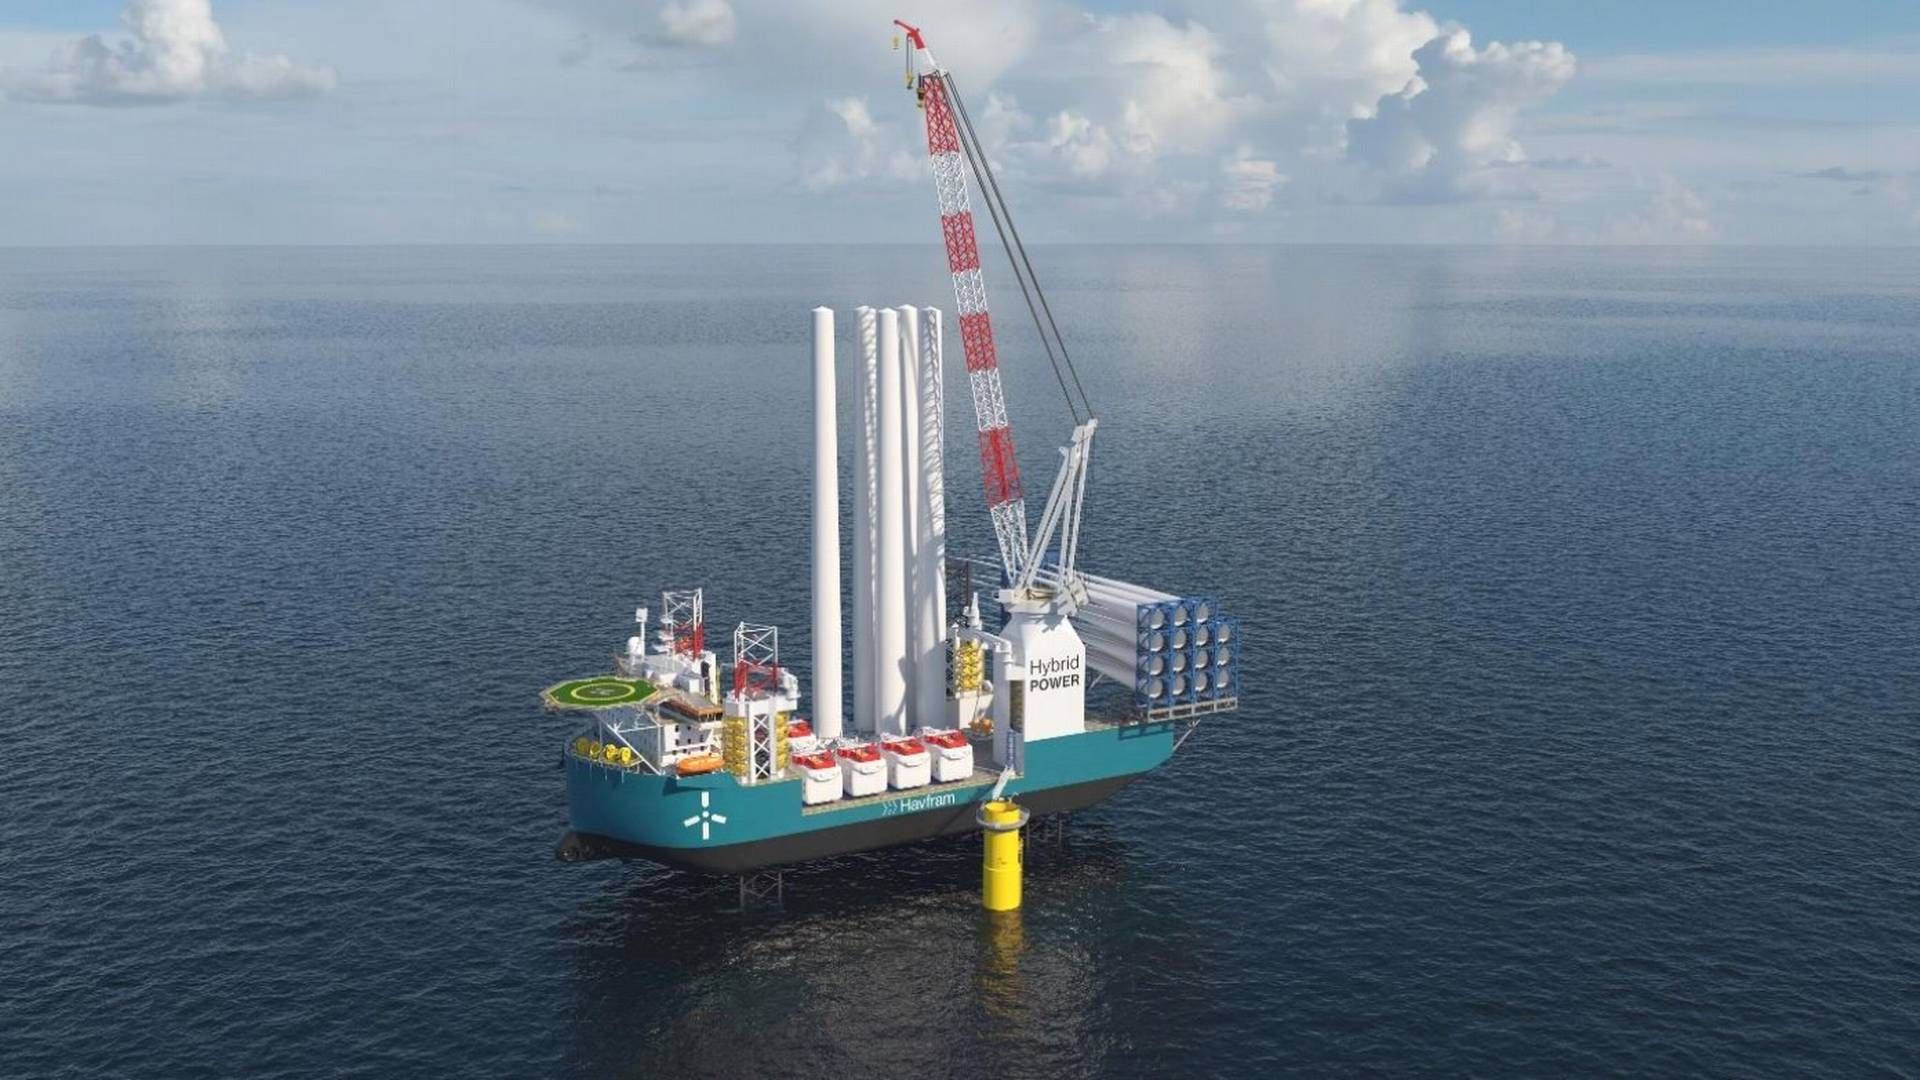 More than 100 wind turbines will be installed in the German offshore wind farm Nordseecluster. | Photo: Havfram